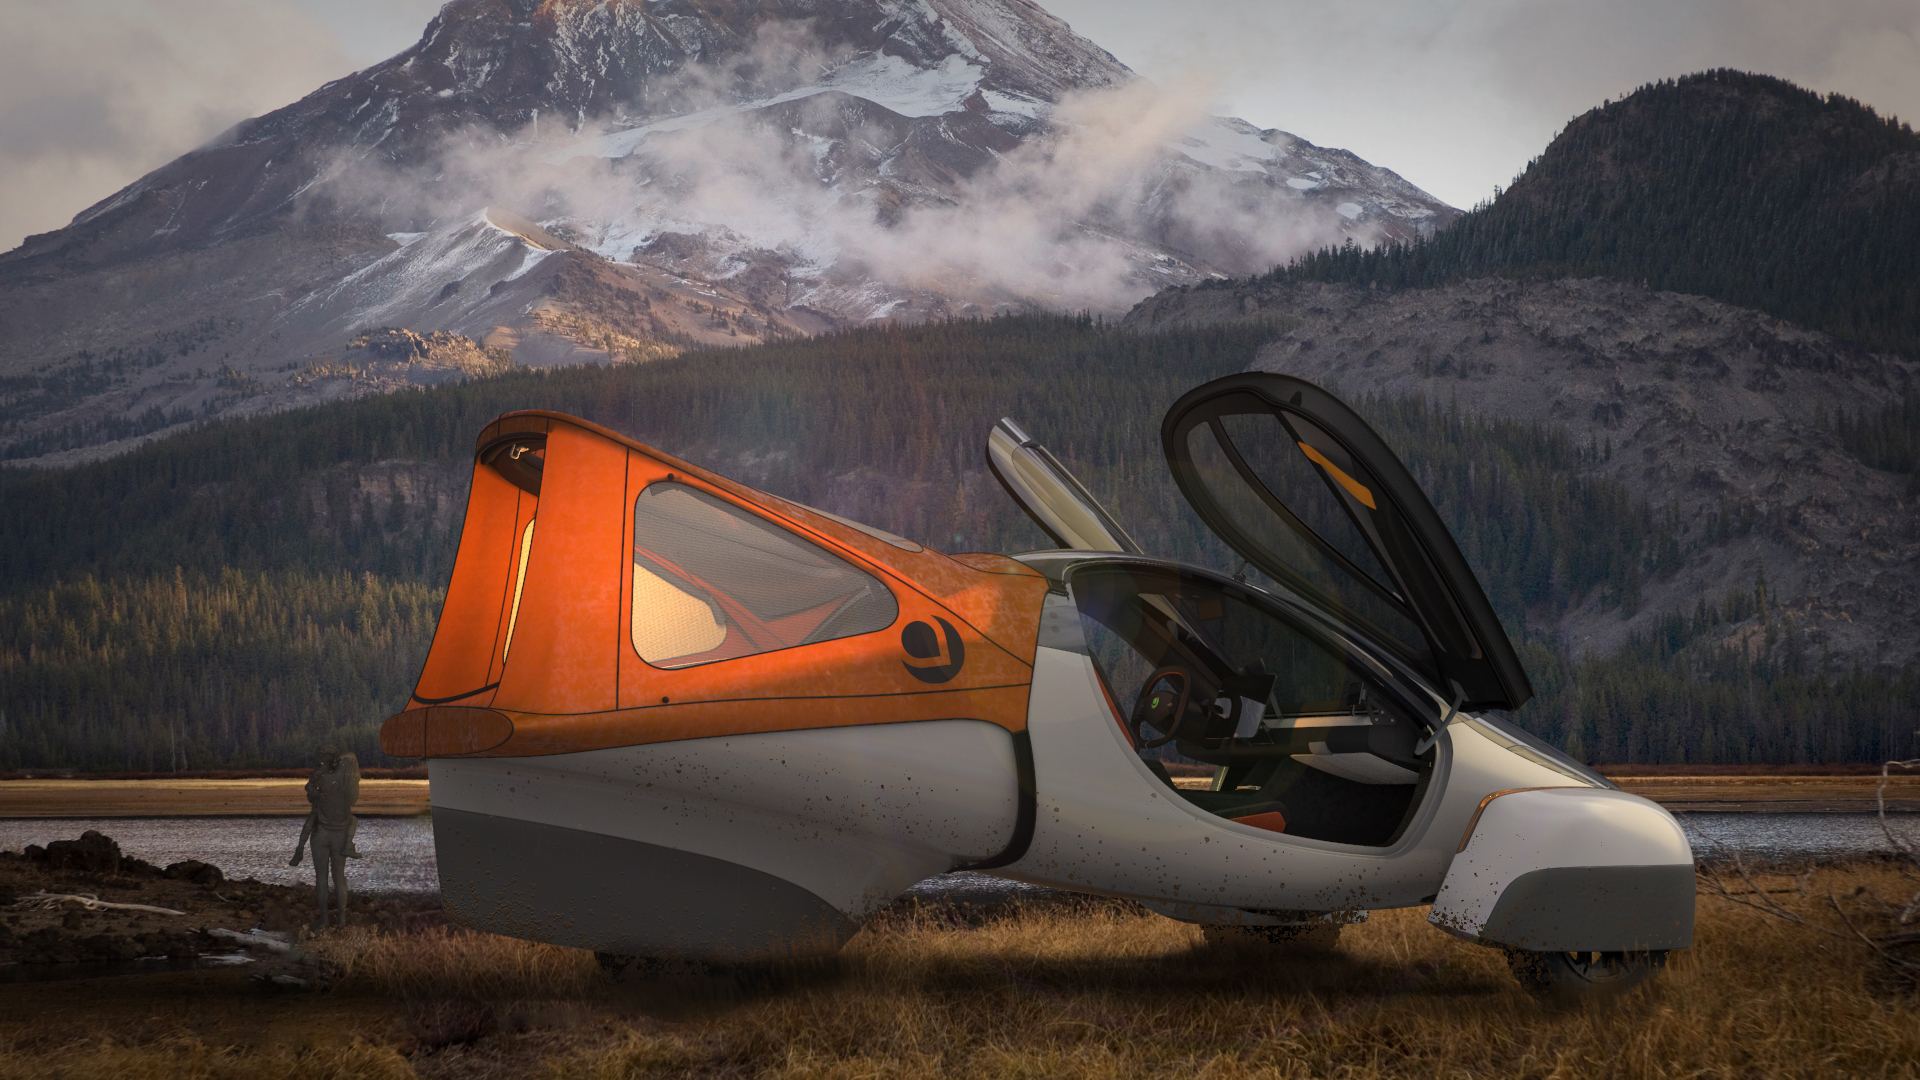 APTERA DEBUTS SOLAR-POWERED CAR FOR OFF-GRID ROAD TRIPS